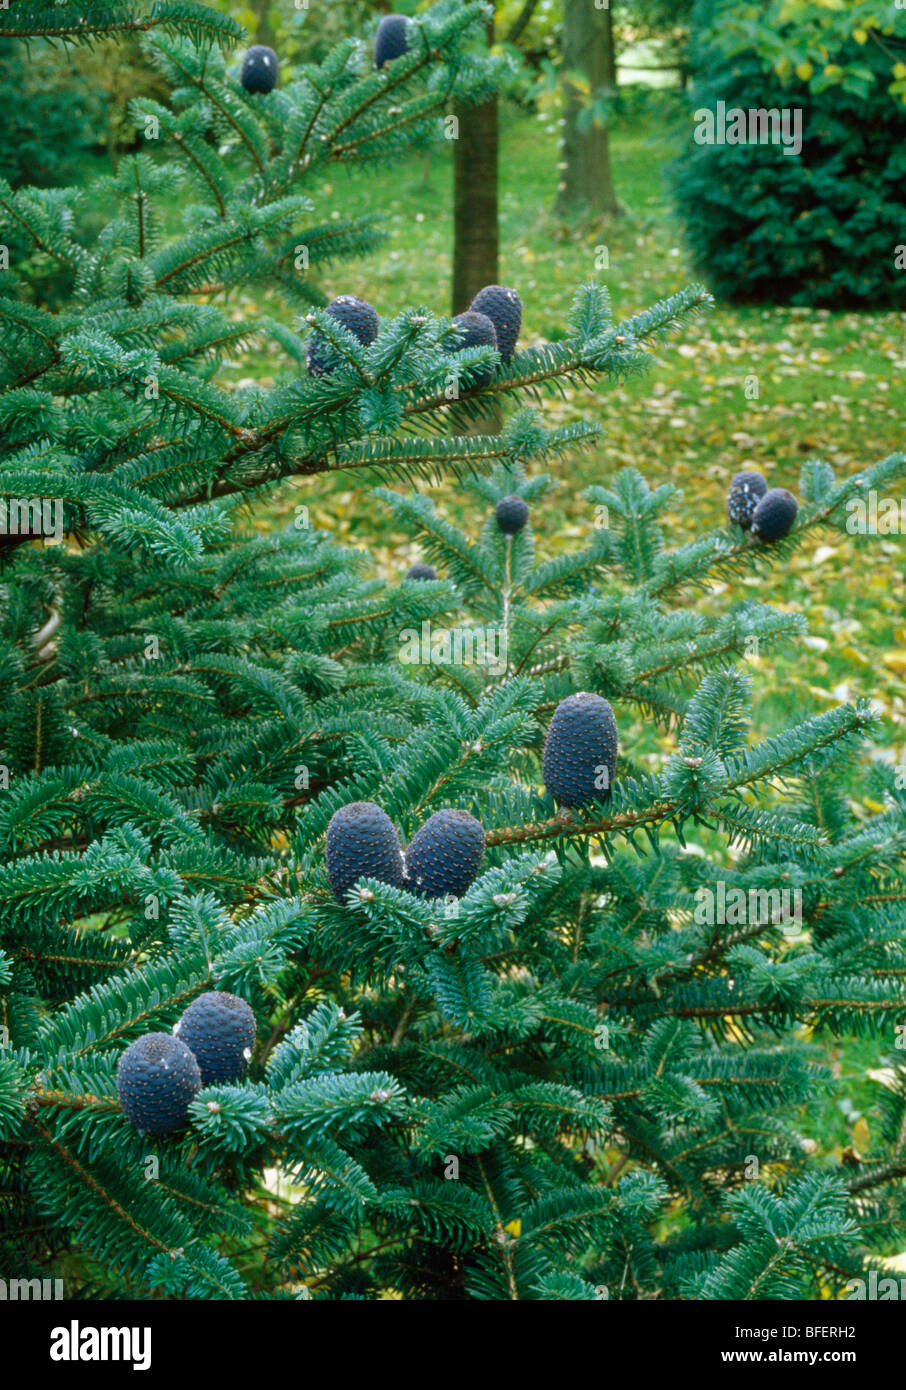 Woodland garden with Korean fir with blue cones in foreground Stock Photo